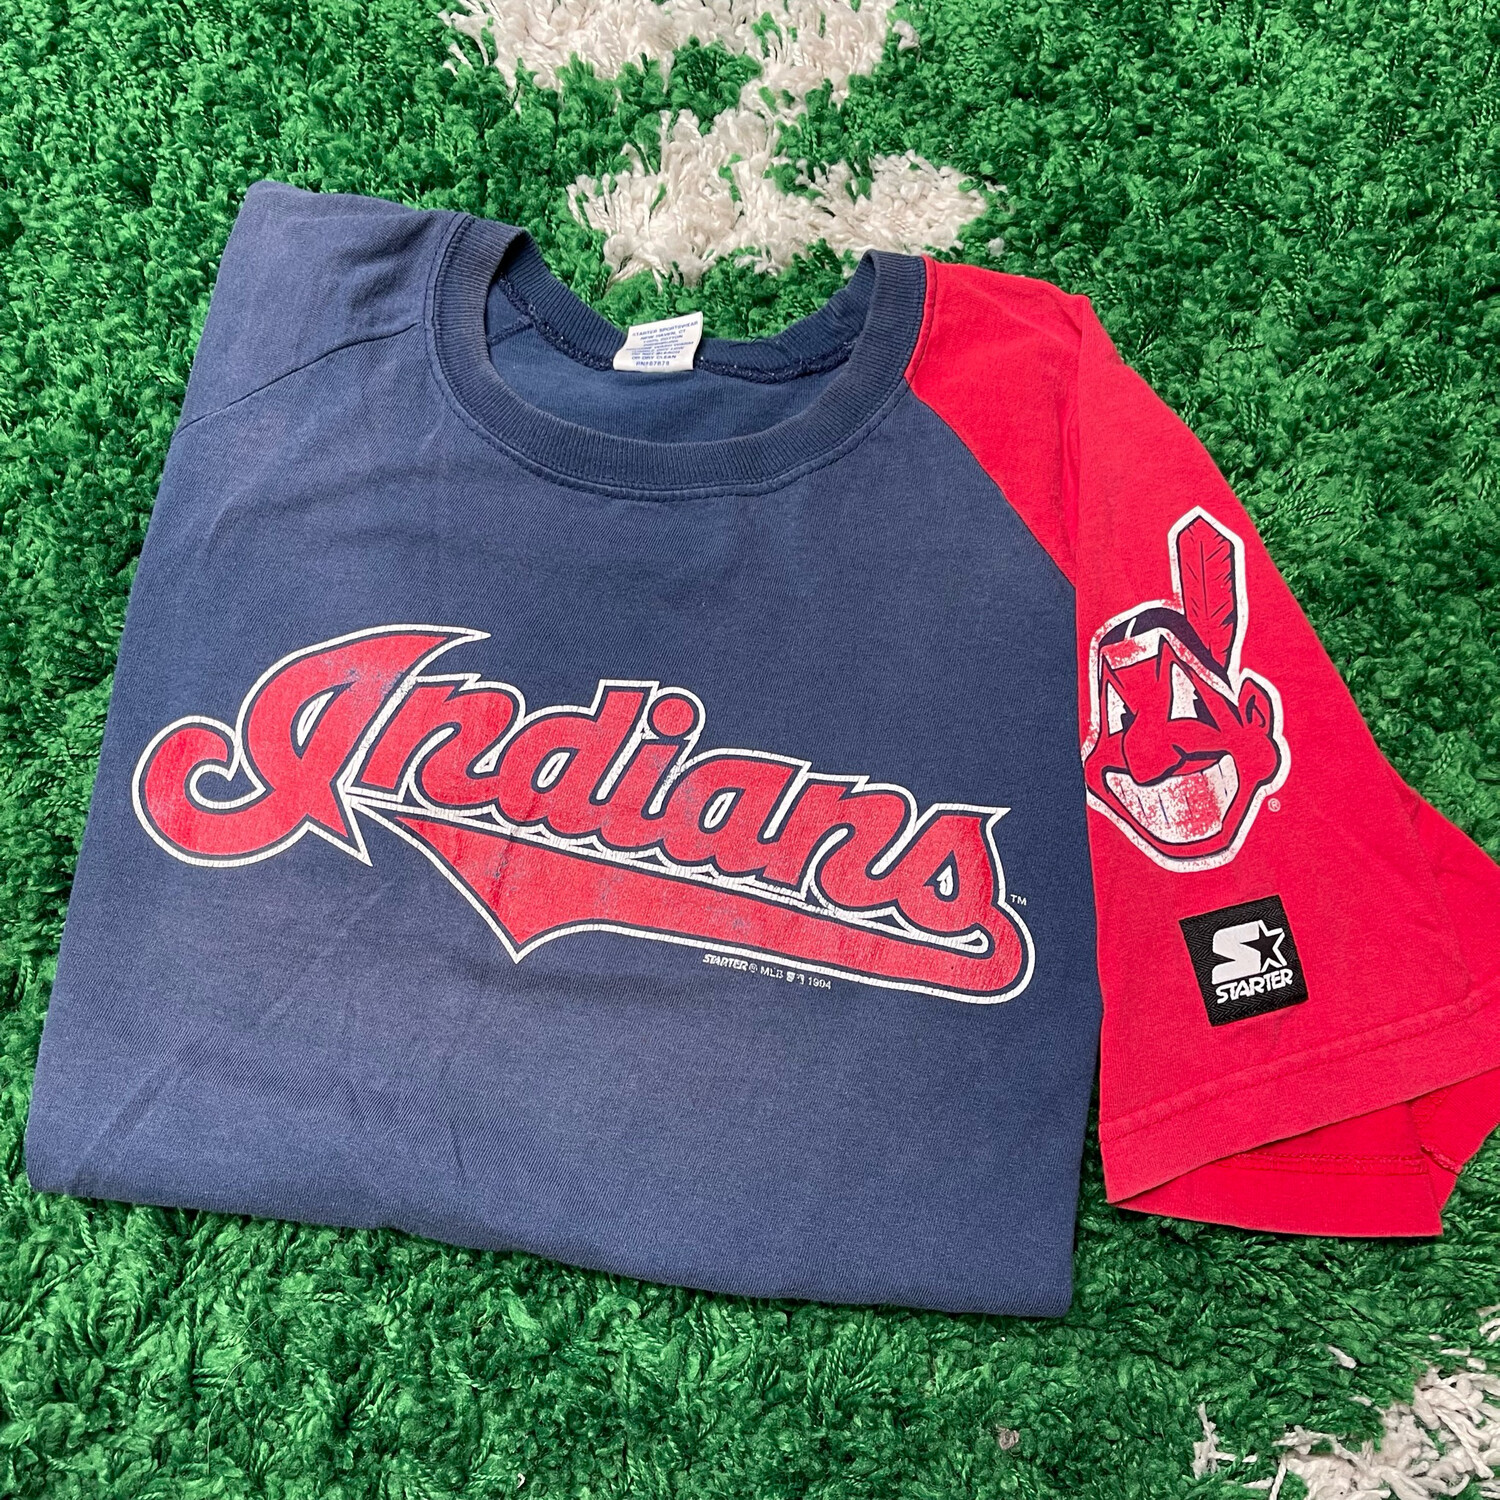 Clevland Indians Starter Sleeve Hit Tee Size Large